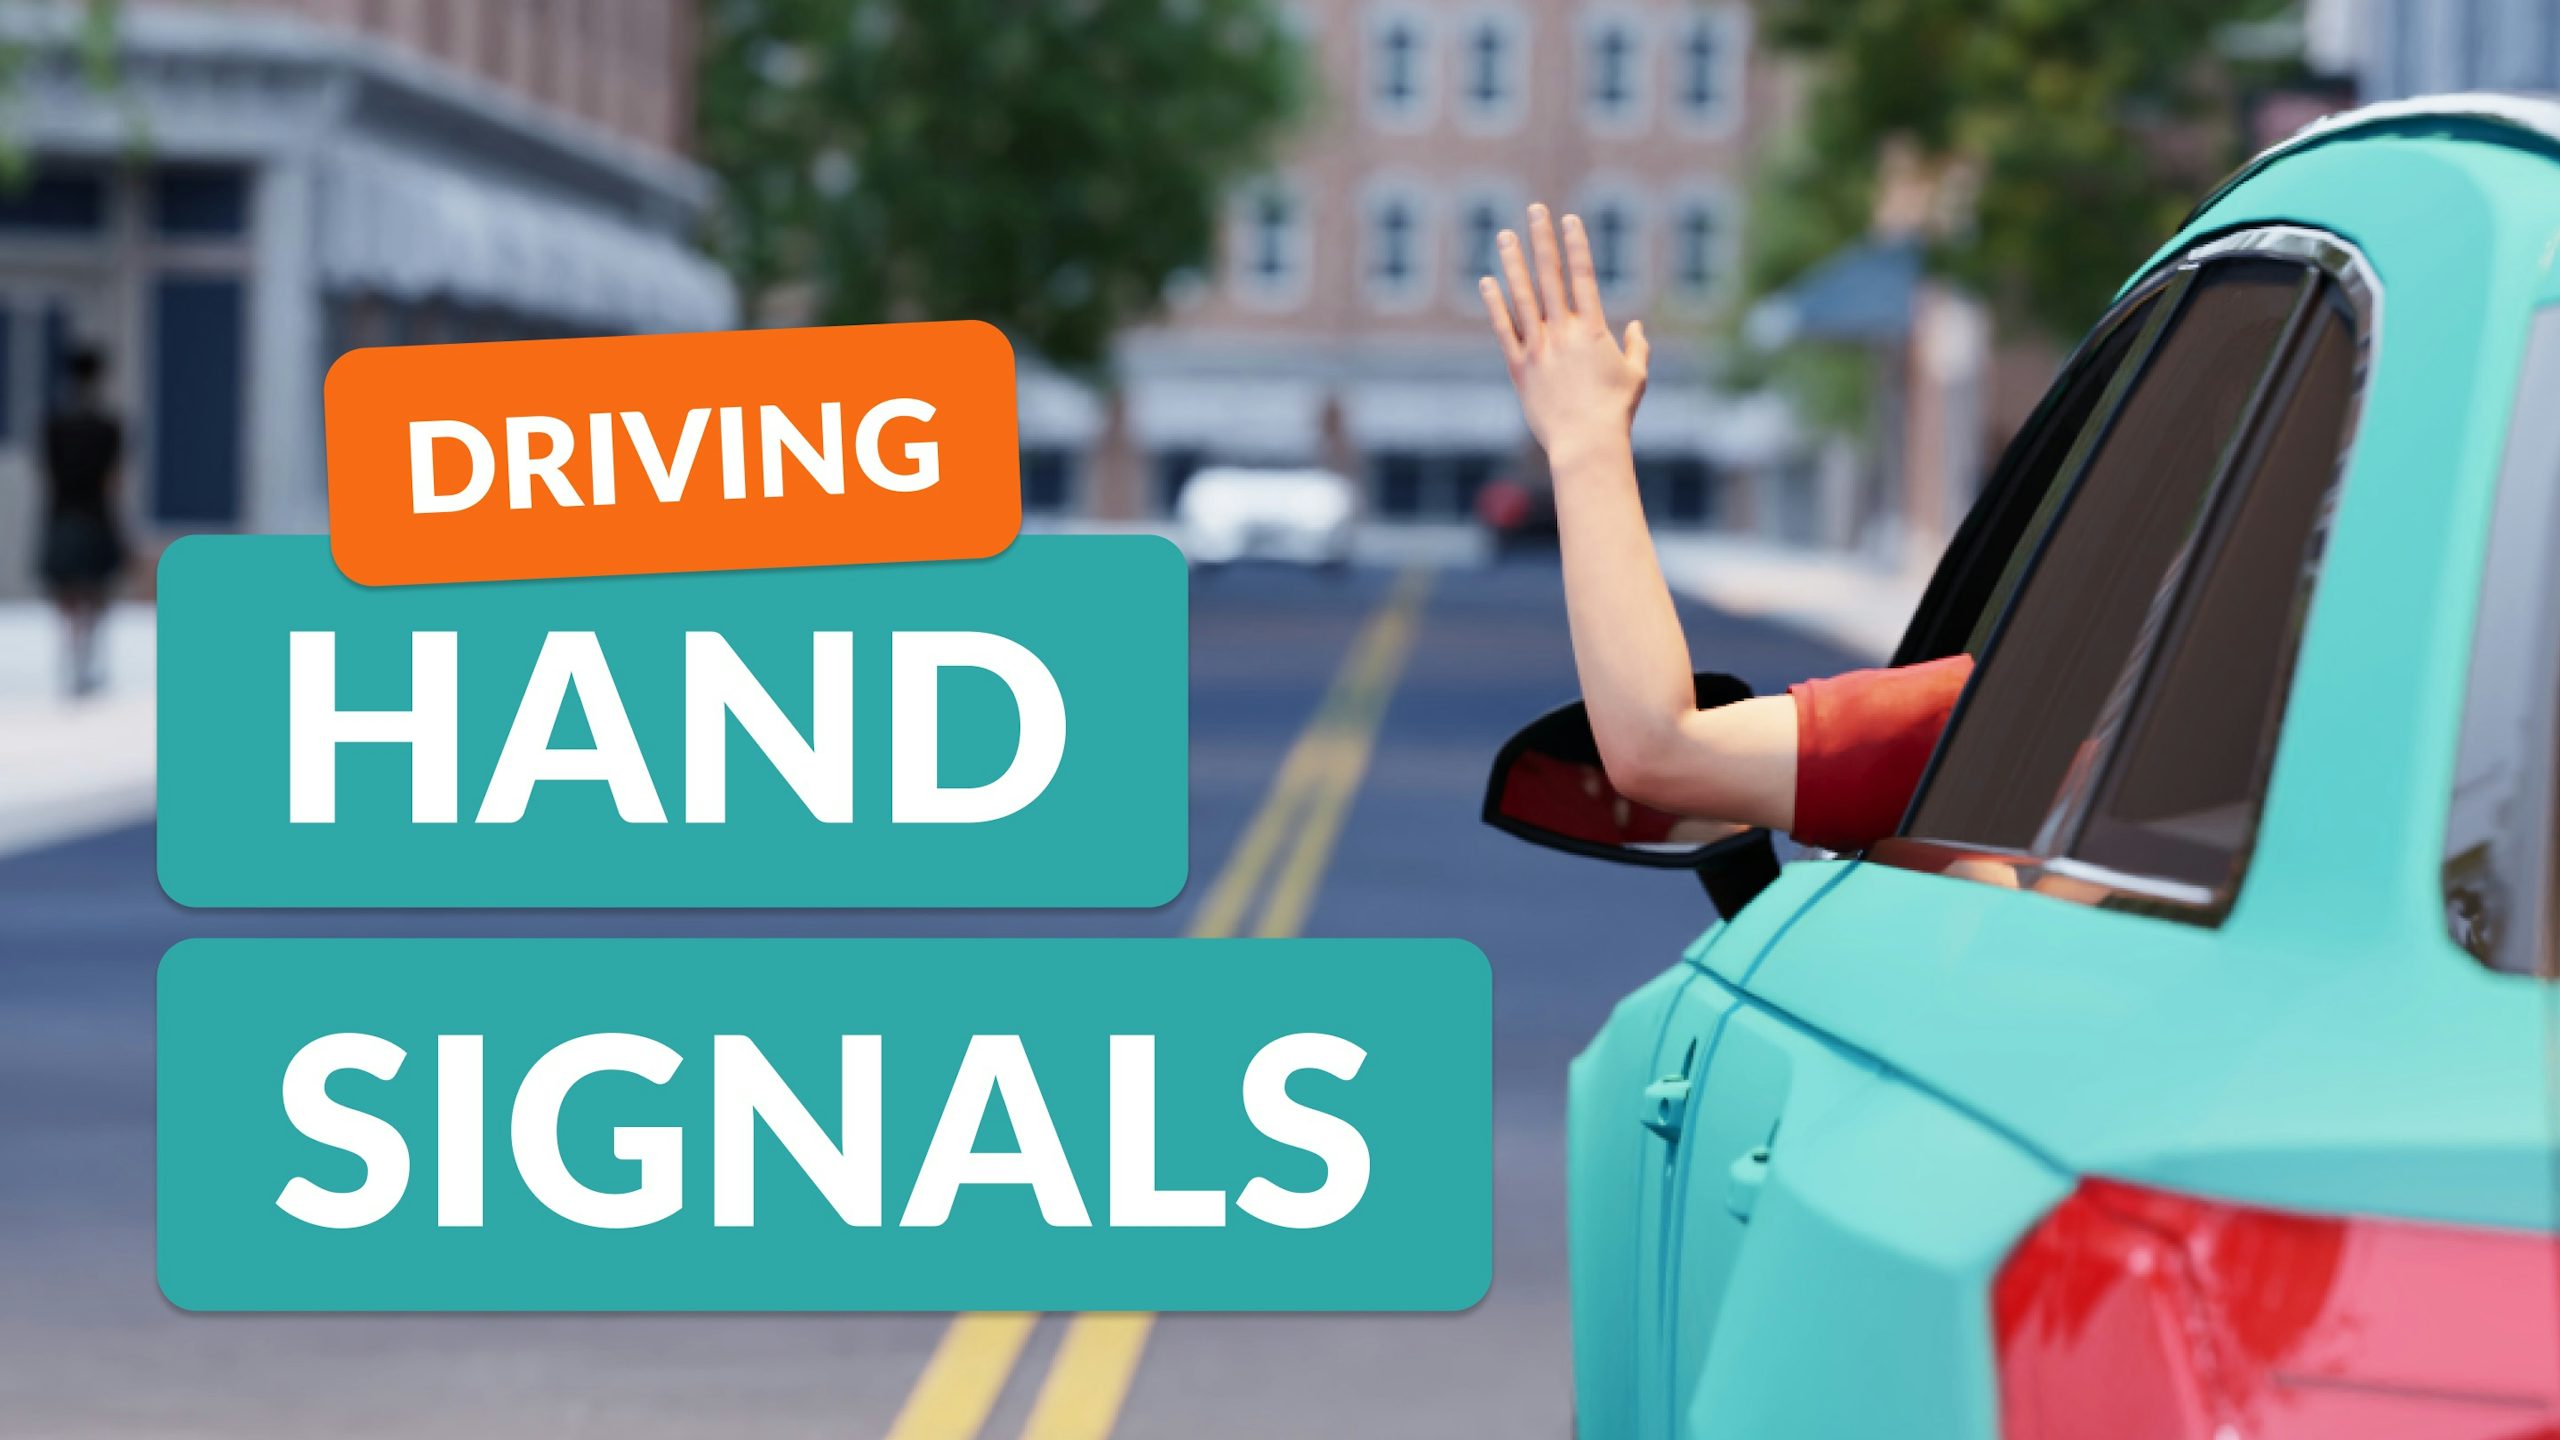 The Hand Signals for Driving: Right, Left, Stop [Video]